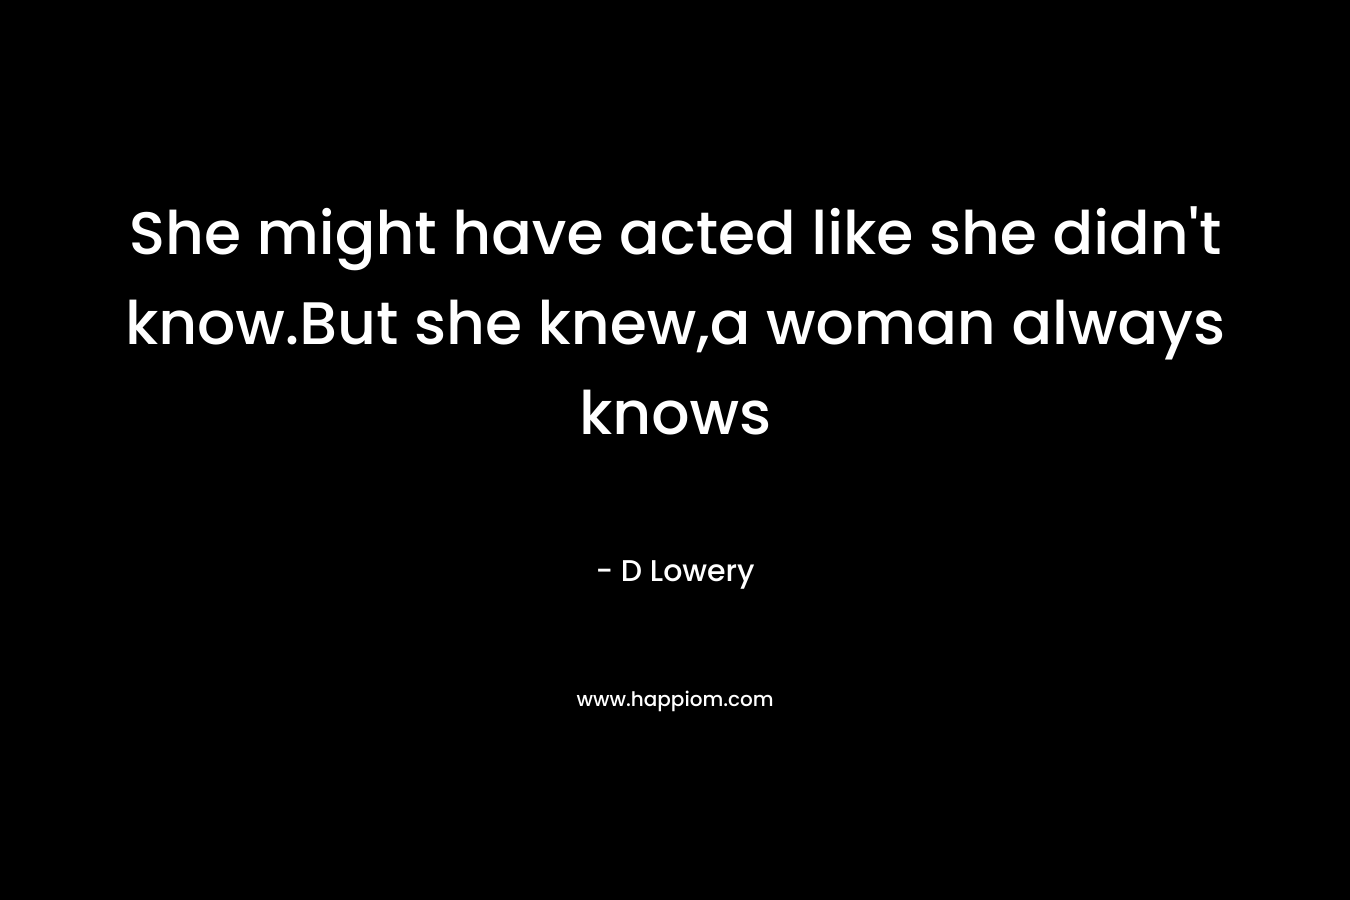 She might have acted like she didn’t know.But she knew,a woman always knows – D Lowery